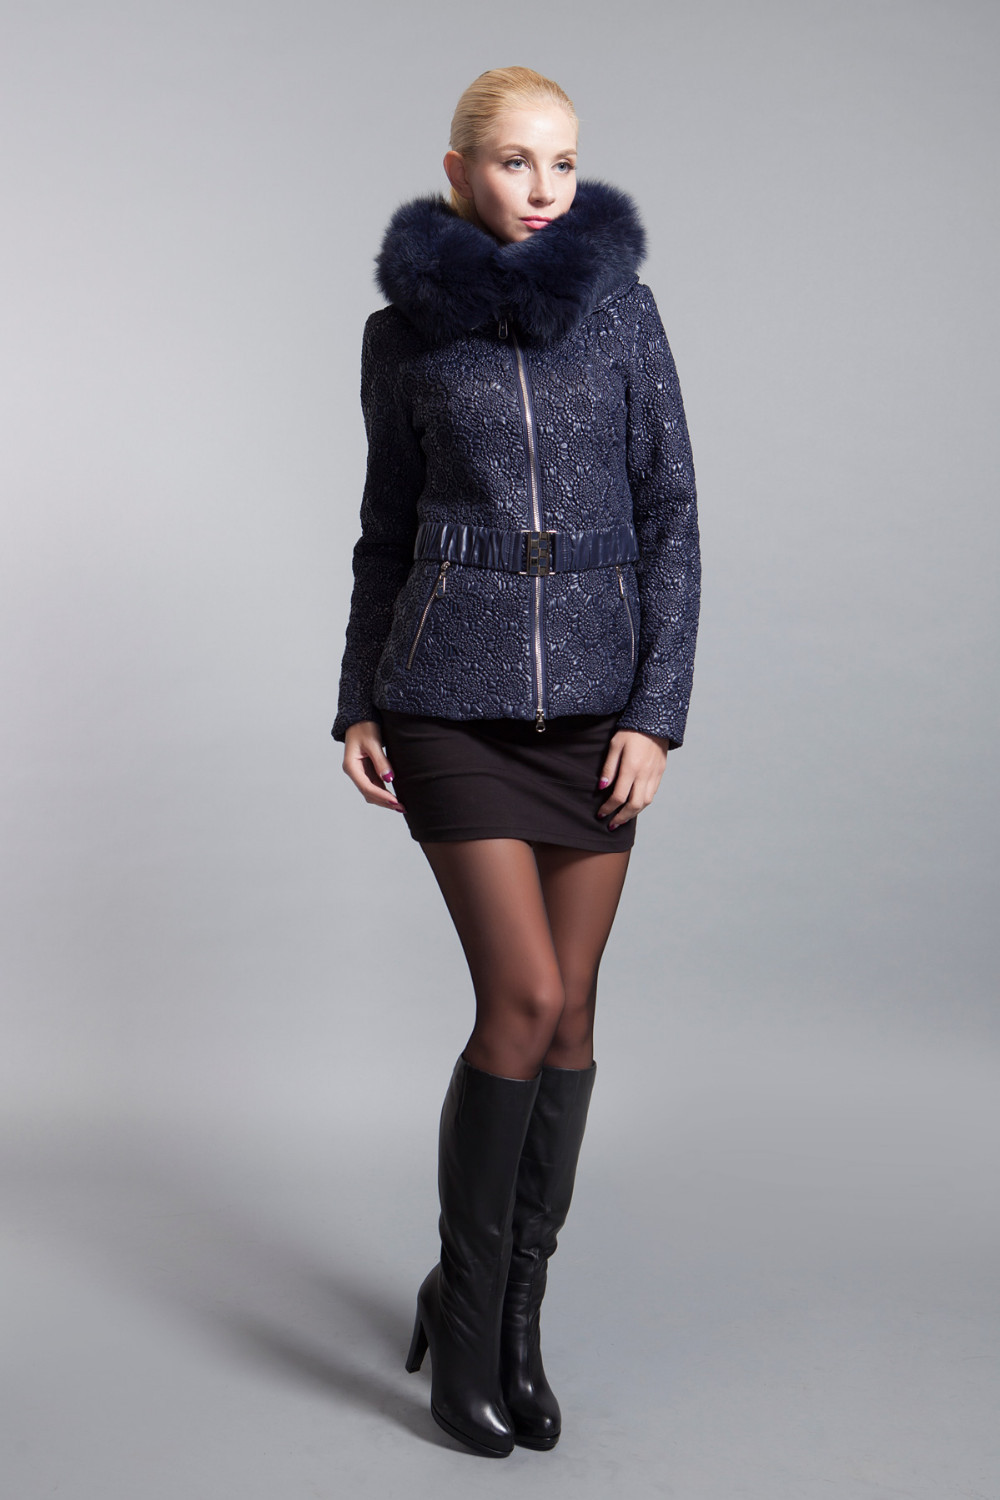 BASIC-EDITIONS-New-Winter-Fashion-Women39s-Clothing-Oversized-Fox-Fur-Short-Parka-With-Hood-Parkas-C-32238249427